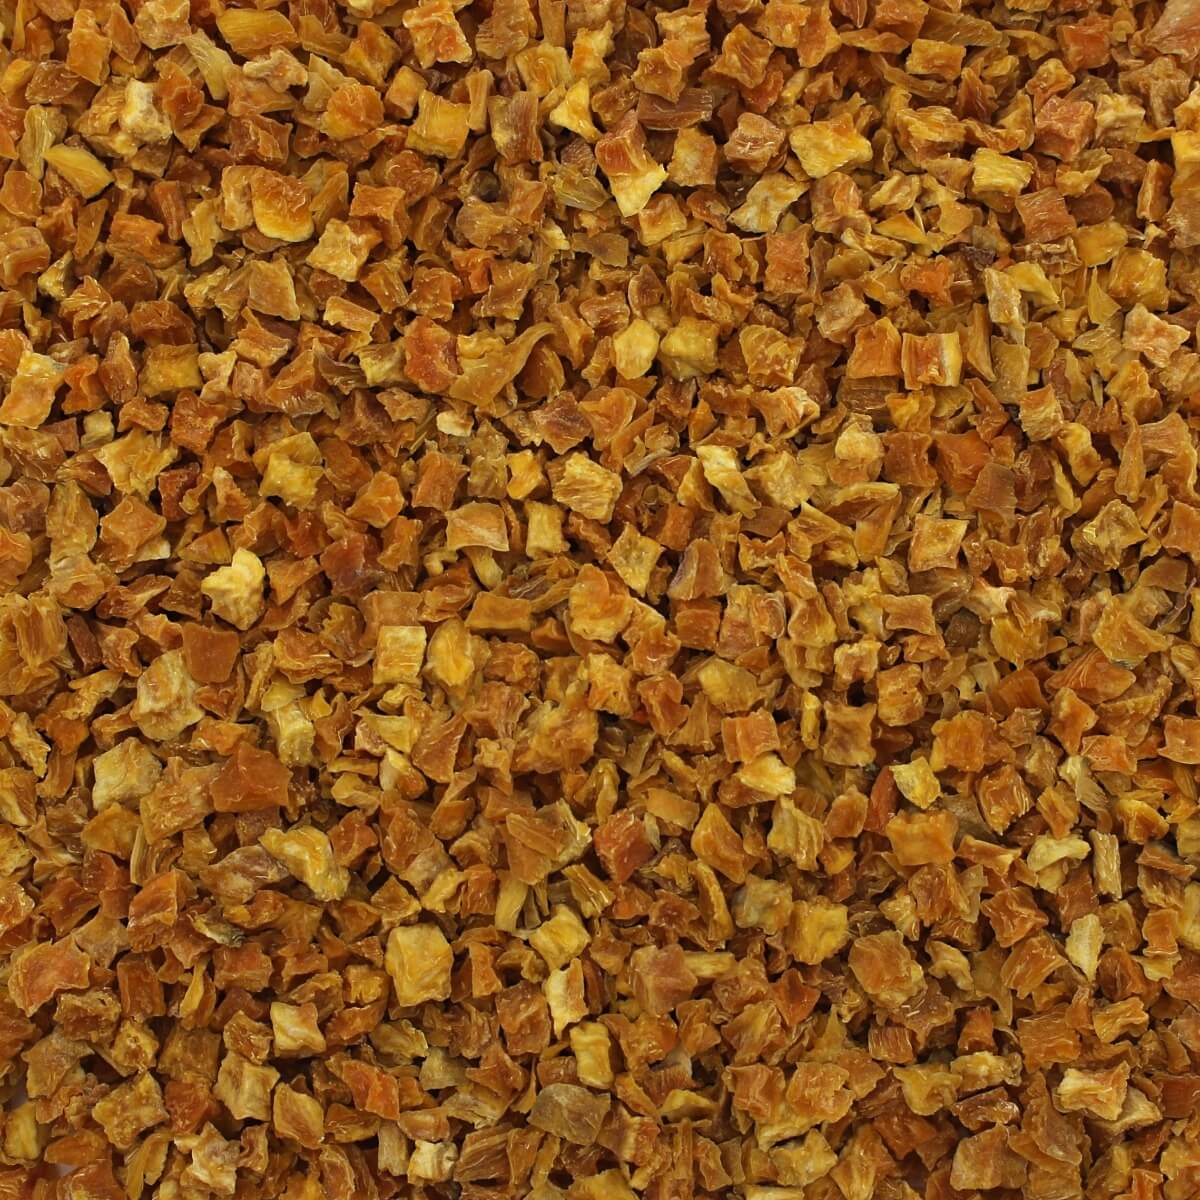 A close up of a pile of dried orange peels.